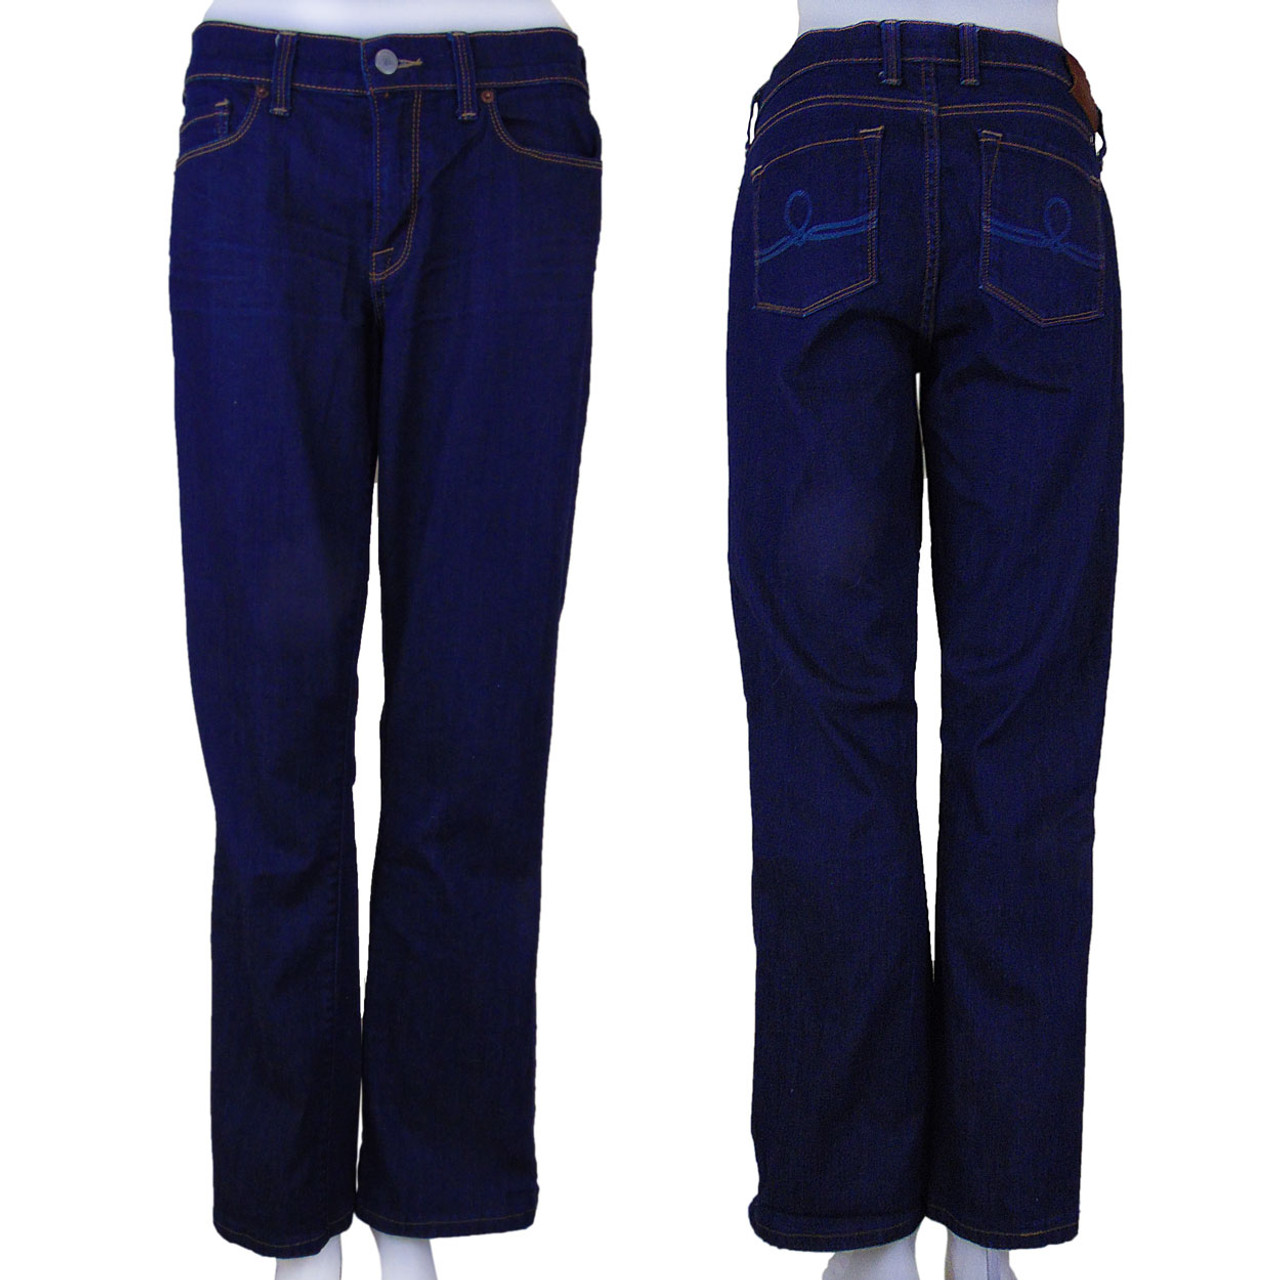 Lucky Brand Blue Jeans Size 10 - 68% off